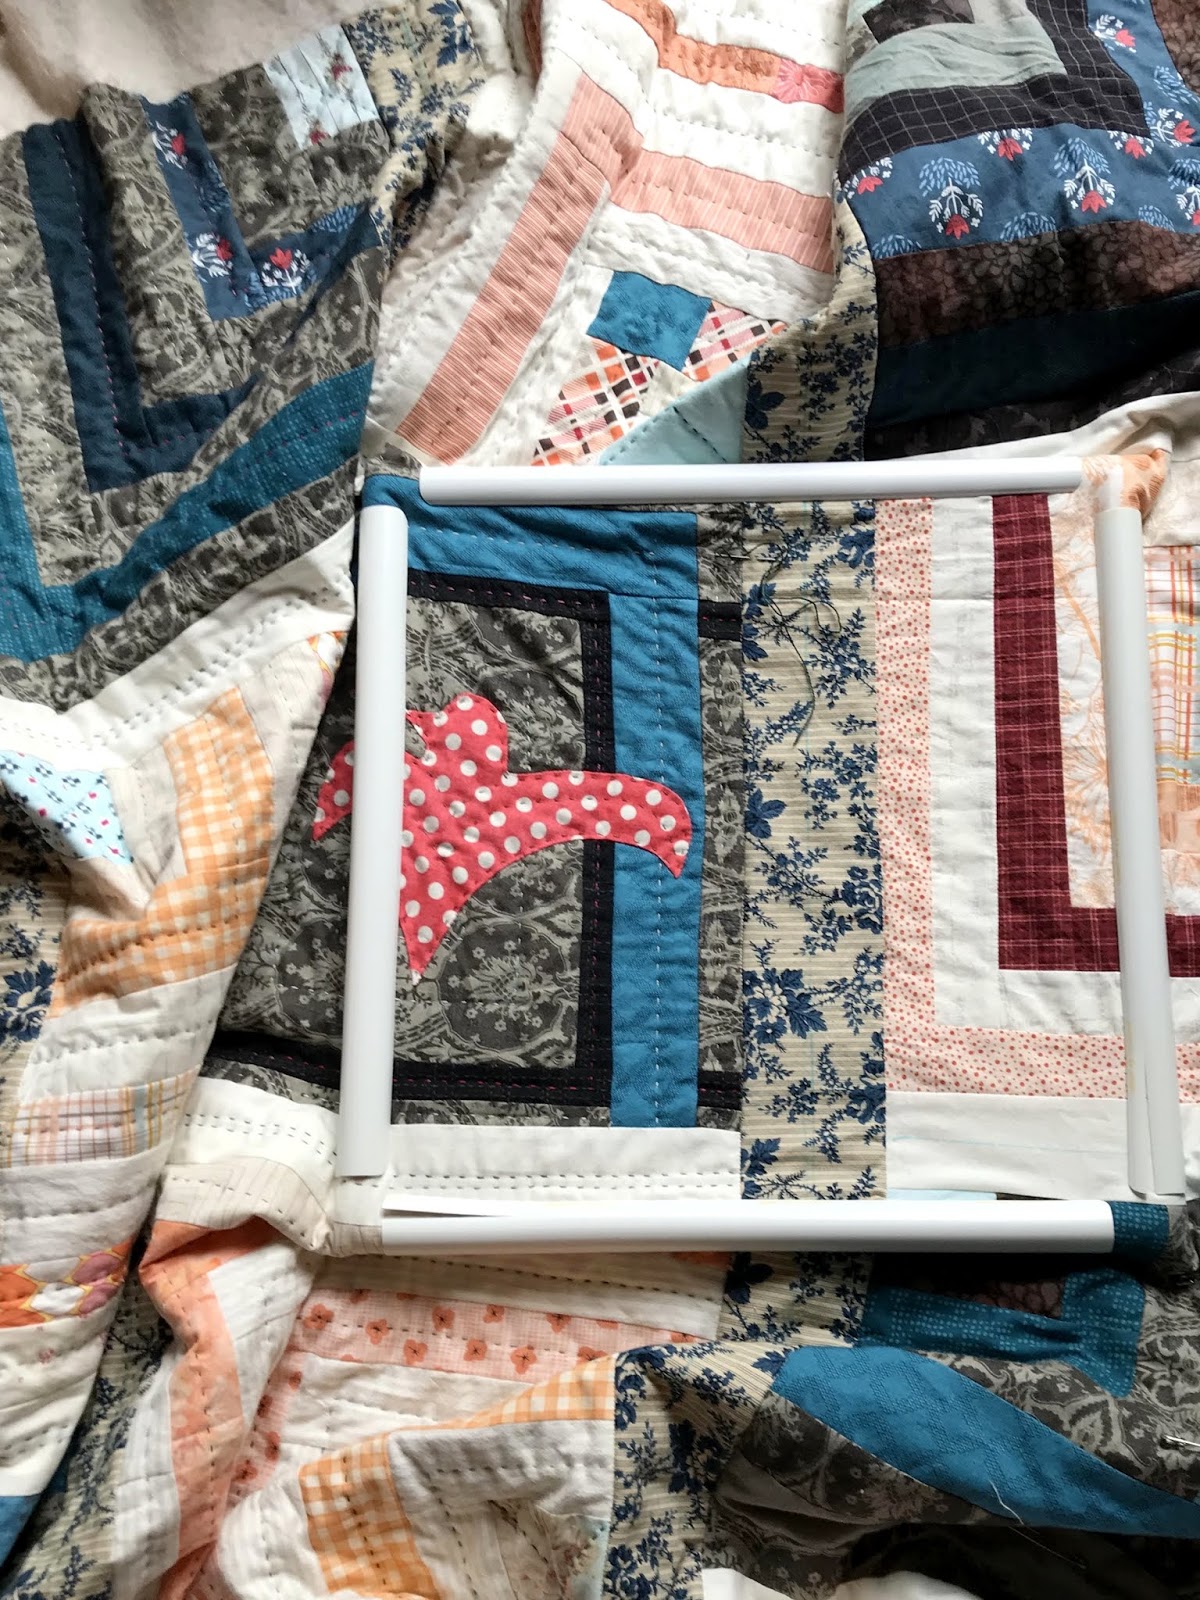 Quilty Folk: Quarter Log Cabin Quilts Coming and Going